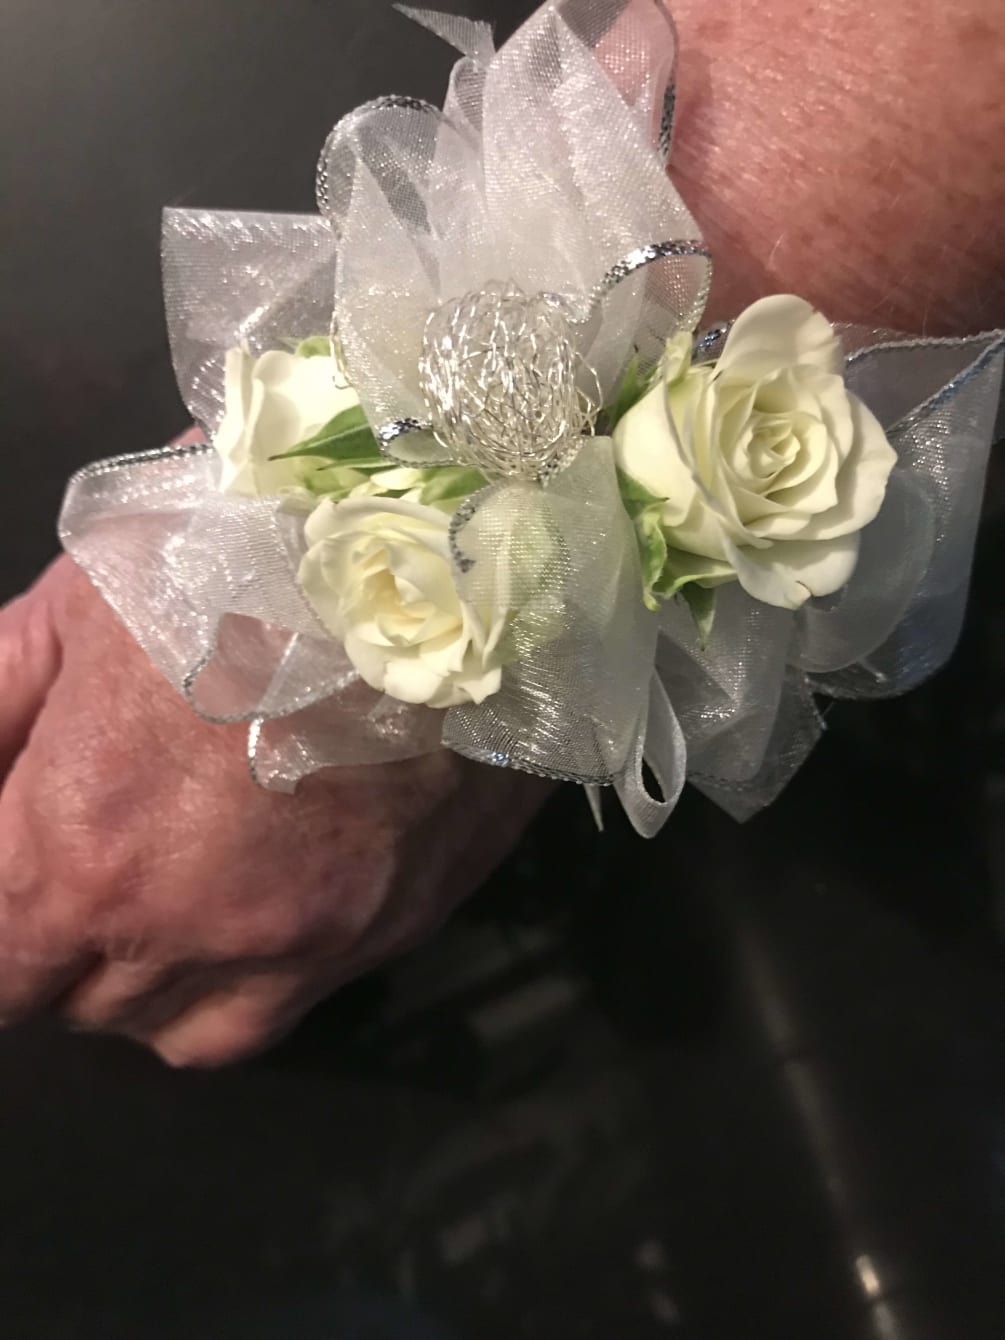 Basic neutral white spray rose corsage with elastic band. Suitable for Prom